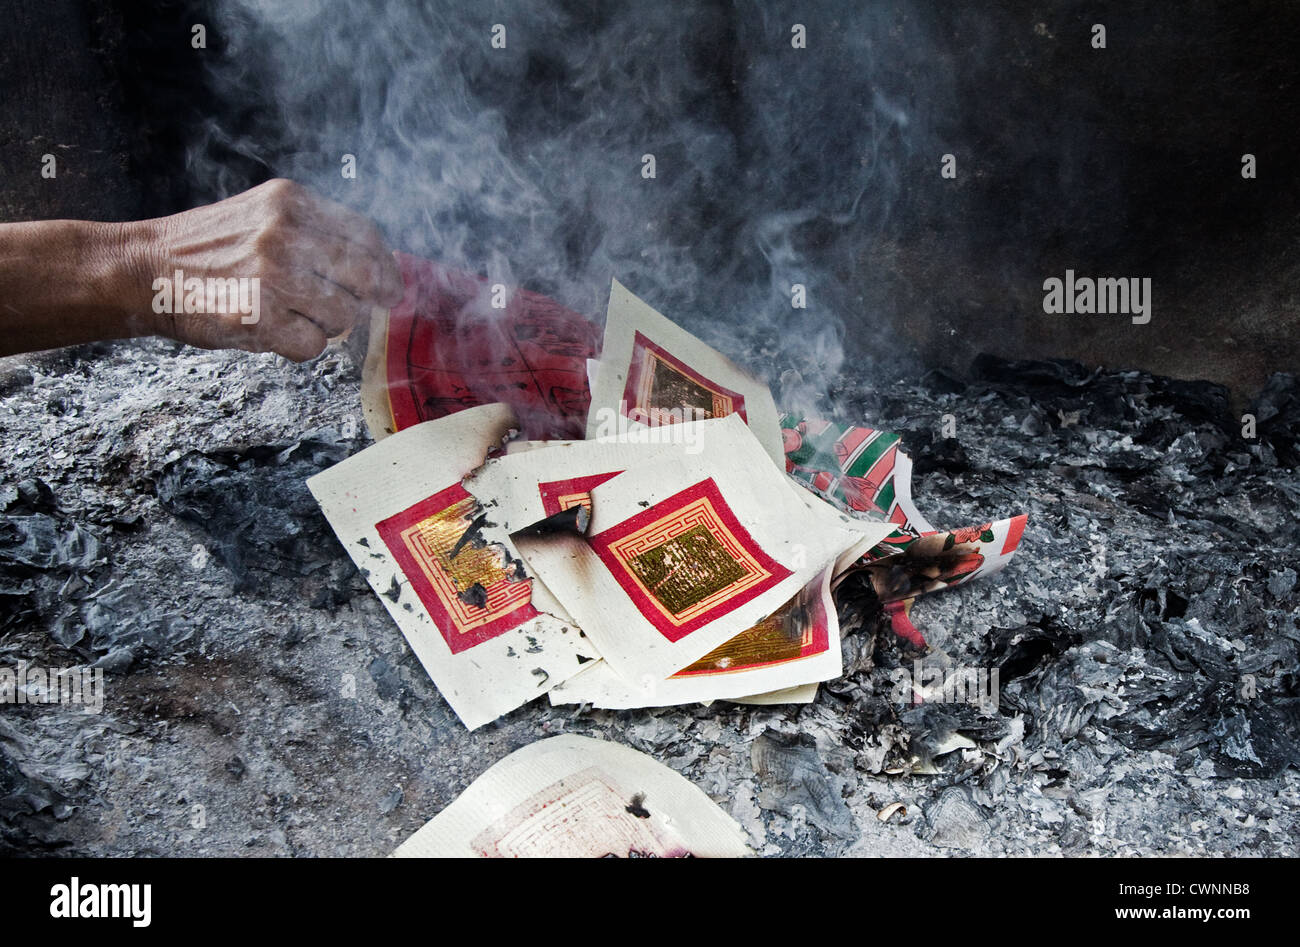 Buddhist Prayers on paper being burnt at a Buddhist Temple in Malaysia at a time of religious rituals on the Buddhist calendar Stock Photo